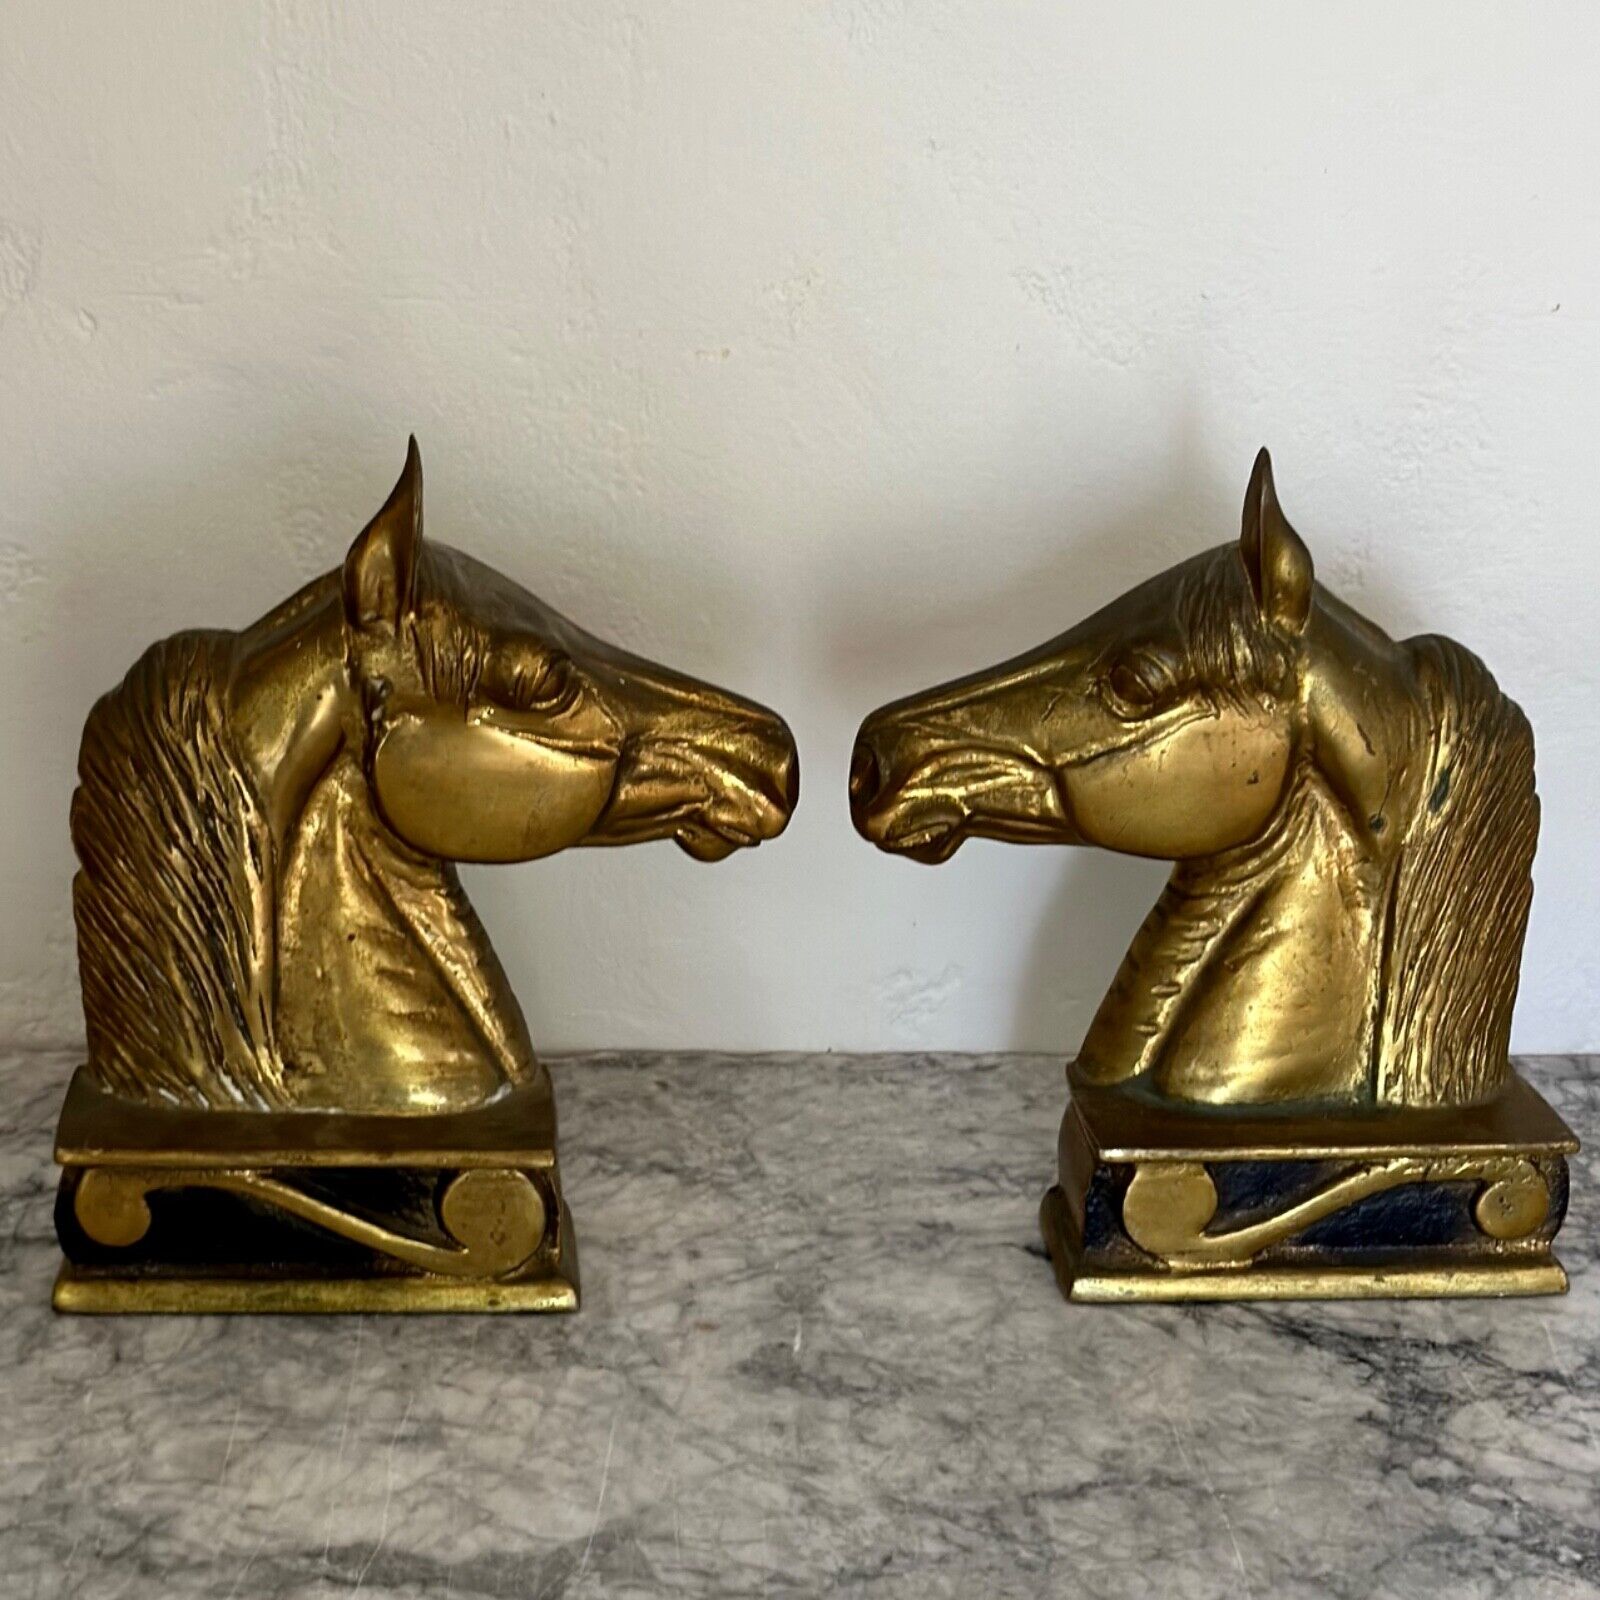 VA METALCRAFTERS 1954 Vintage Brass Horse Bookends \